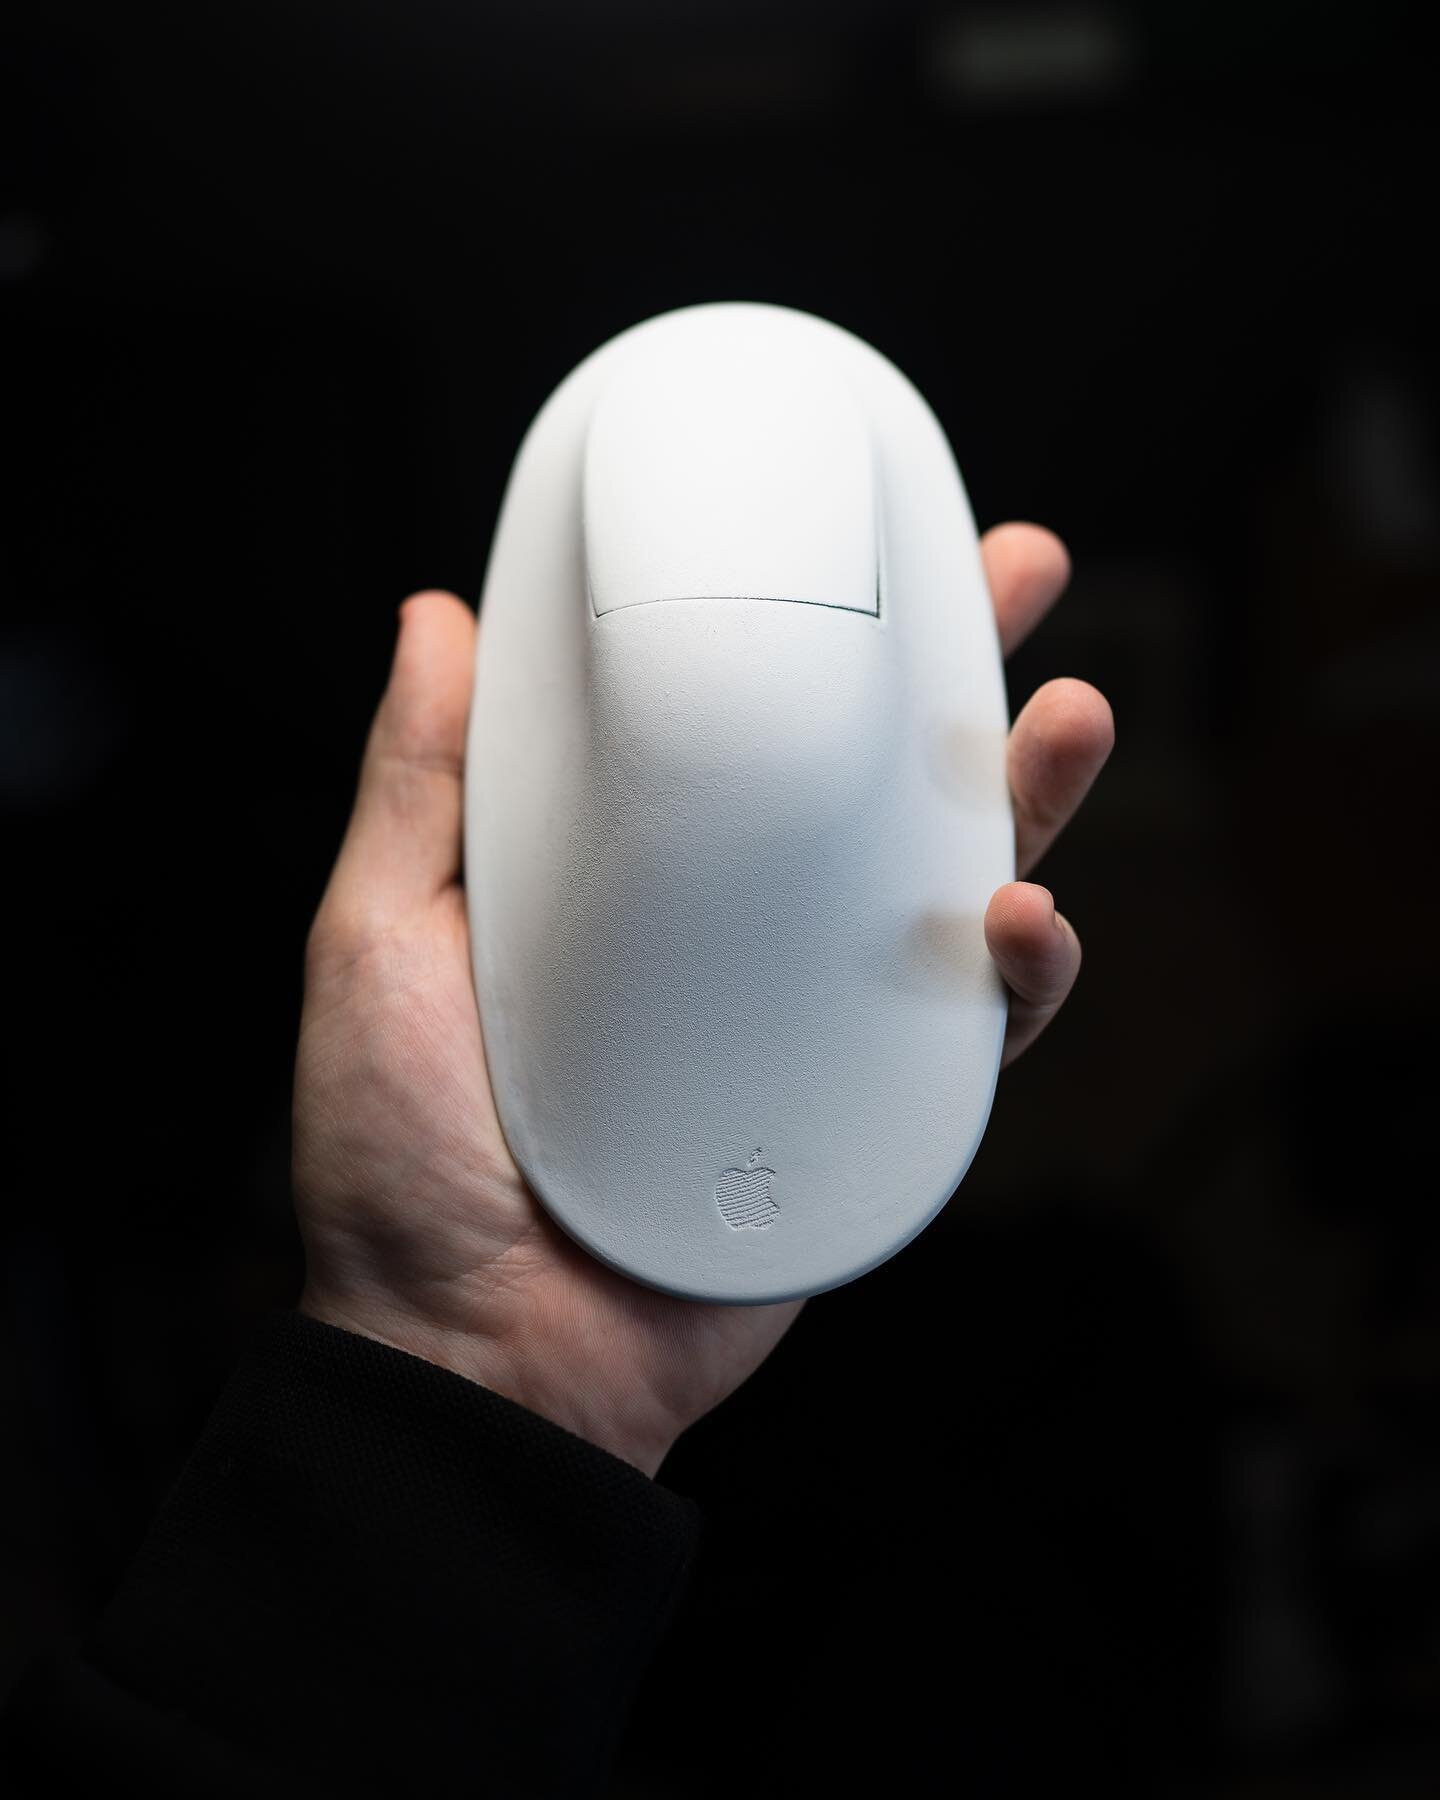 Took some time the other night to paint my prototype and shoot some photos. It&rsquo;s far from perfect, but fun to see your ideas come to life. 

I also wanted to show a picture of the mouse in use, where you can see that your entire hand has a rest